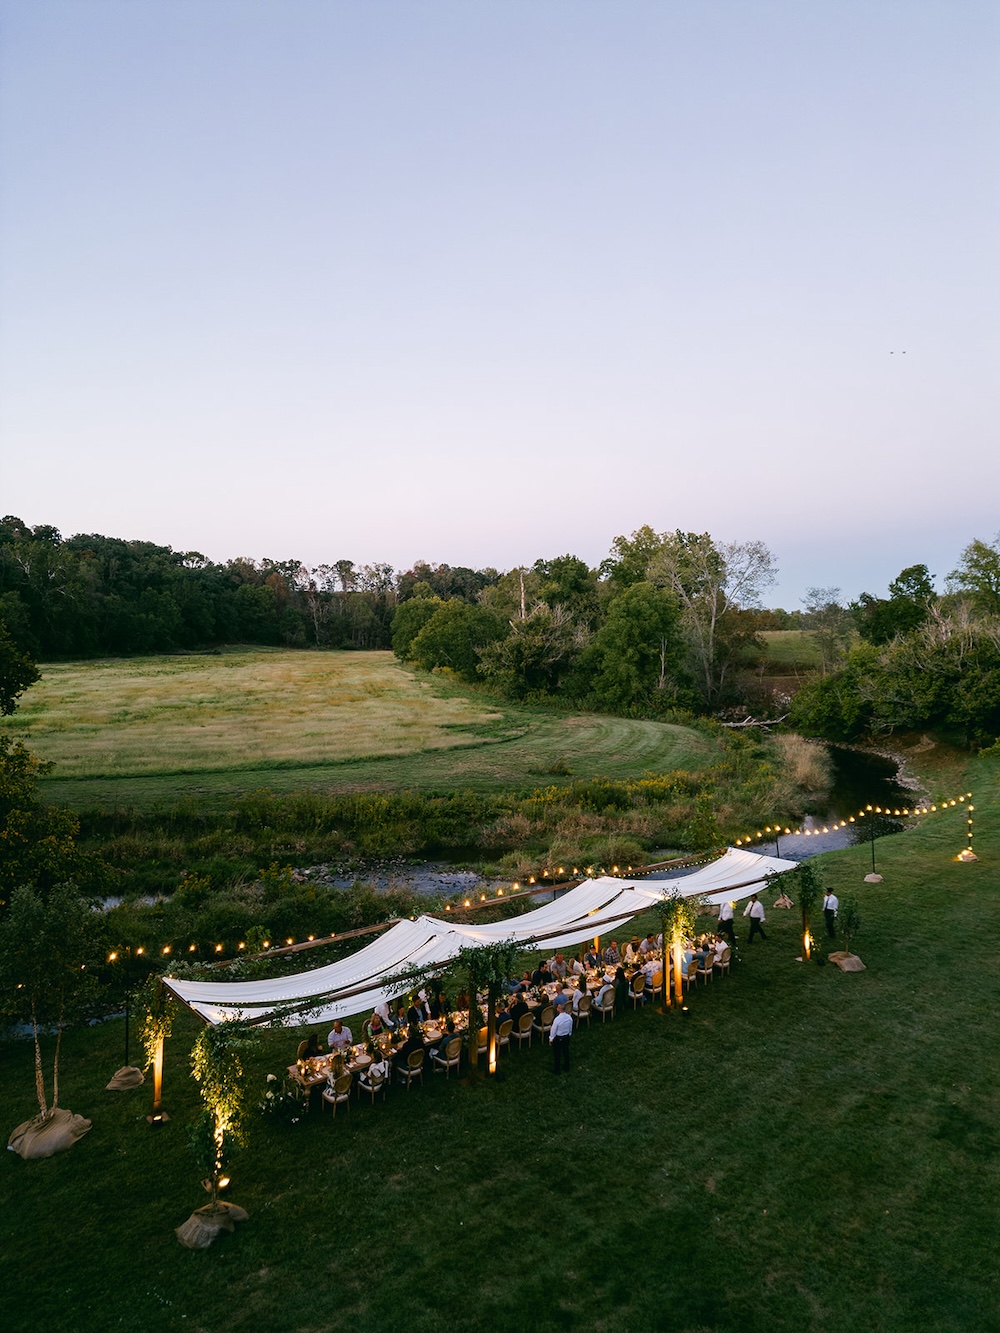 Ariel photograph of rustic chic tented alfresco dinner. Milestone birthday party celebration weekend in Middleburg, Virginia. Sarah Bradshaw Photography.